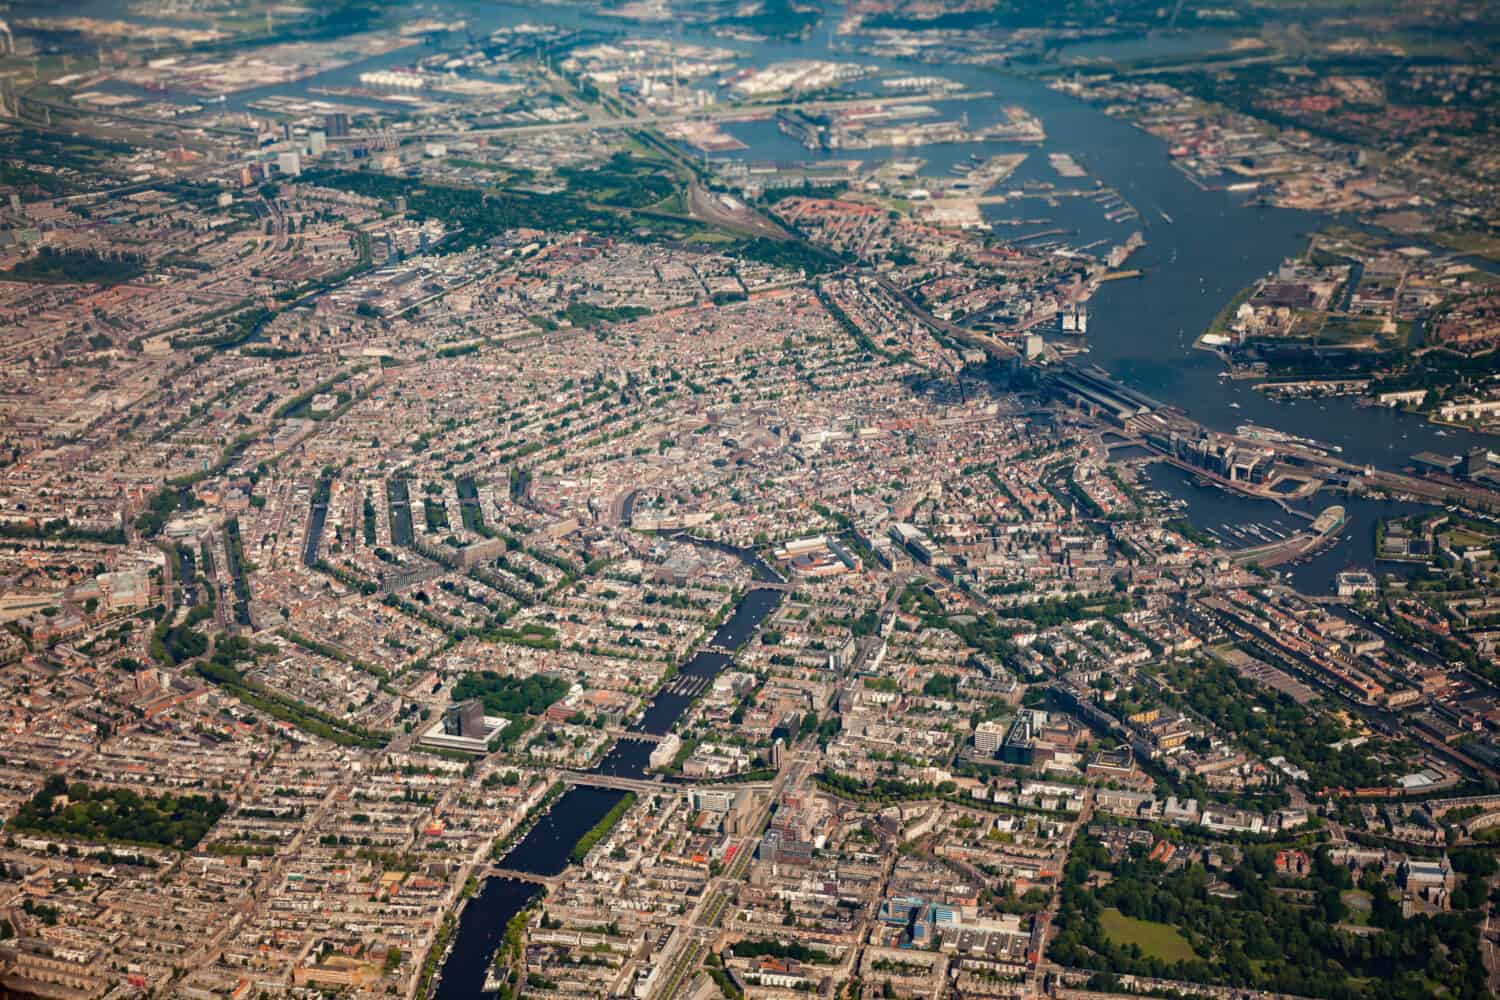 City center of Amsterdam from the sky (aerial photo)